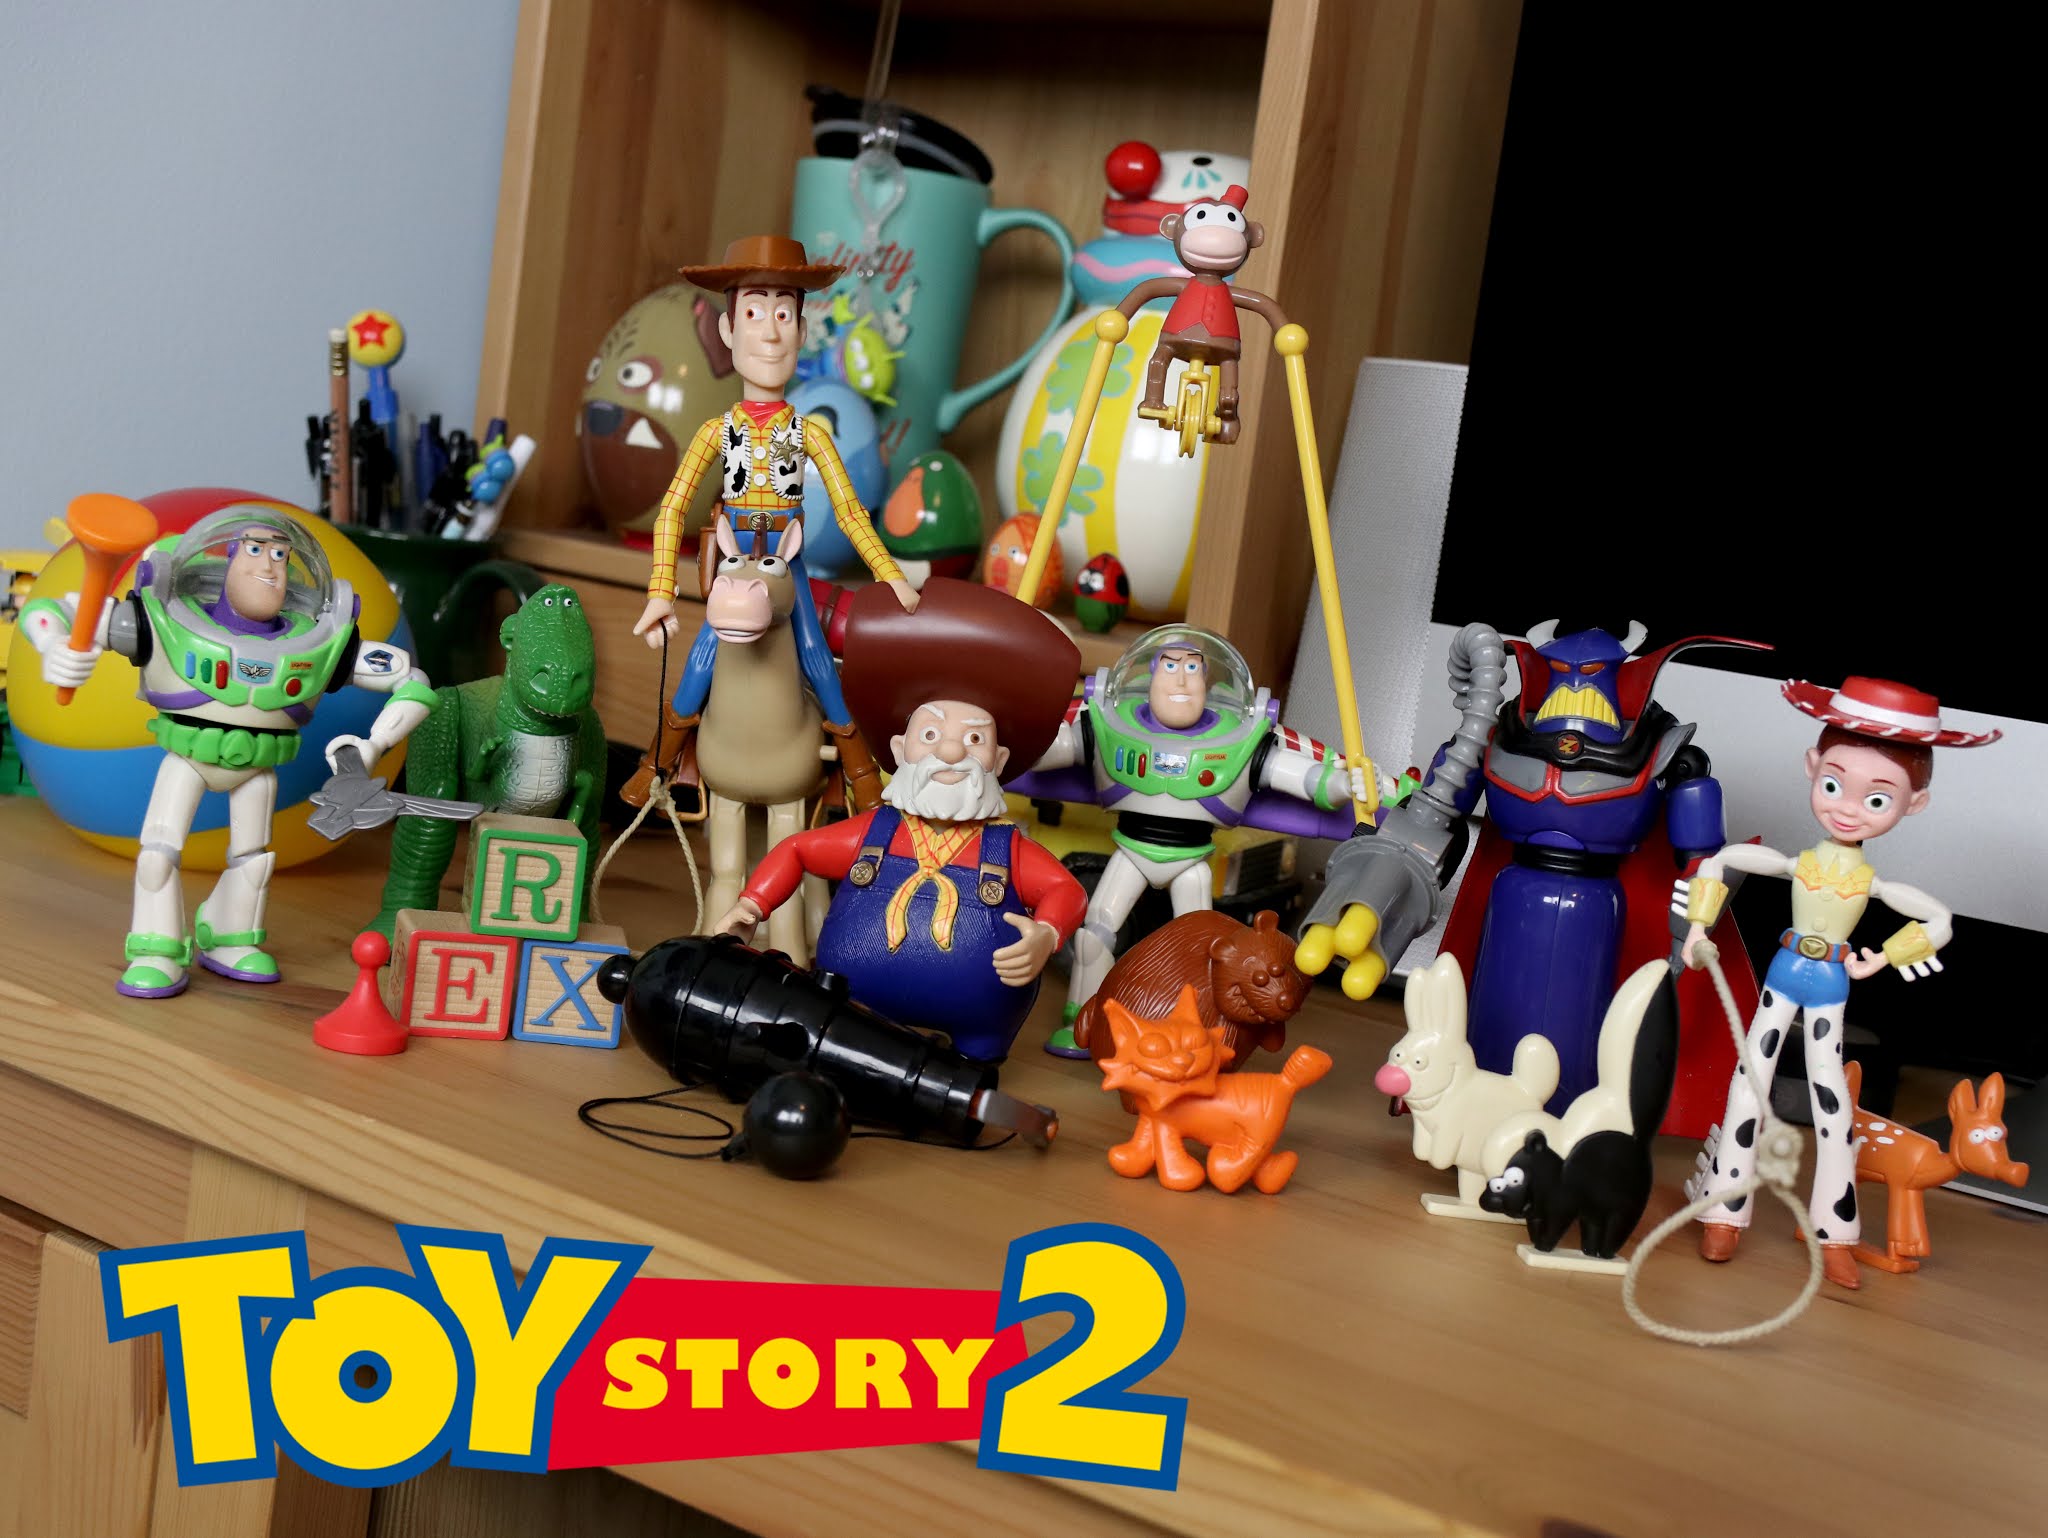 download disney collection toy story 5 pc figurine playset